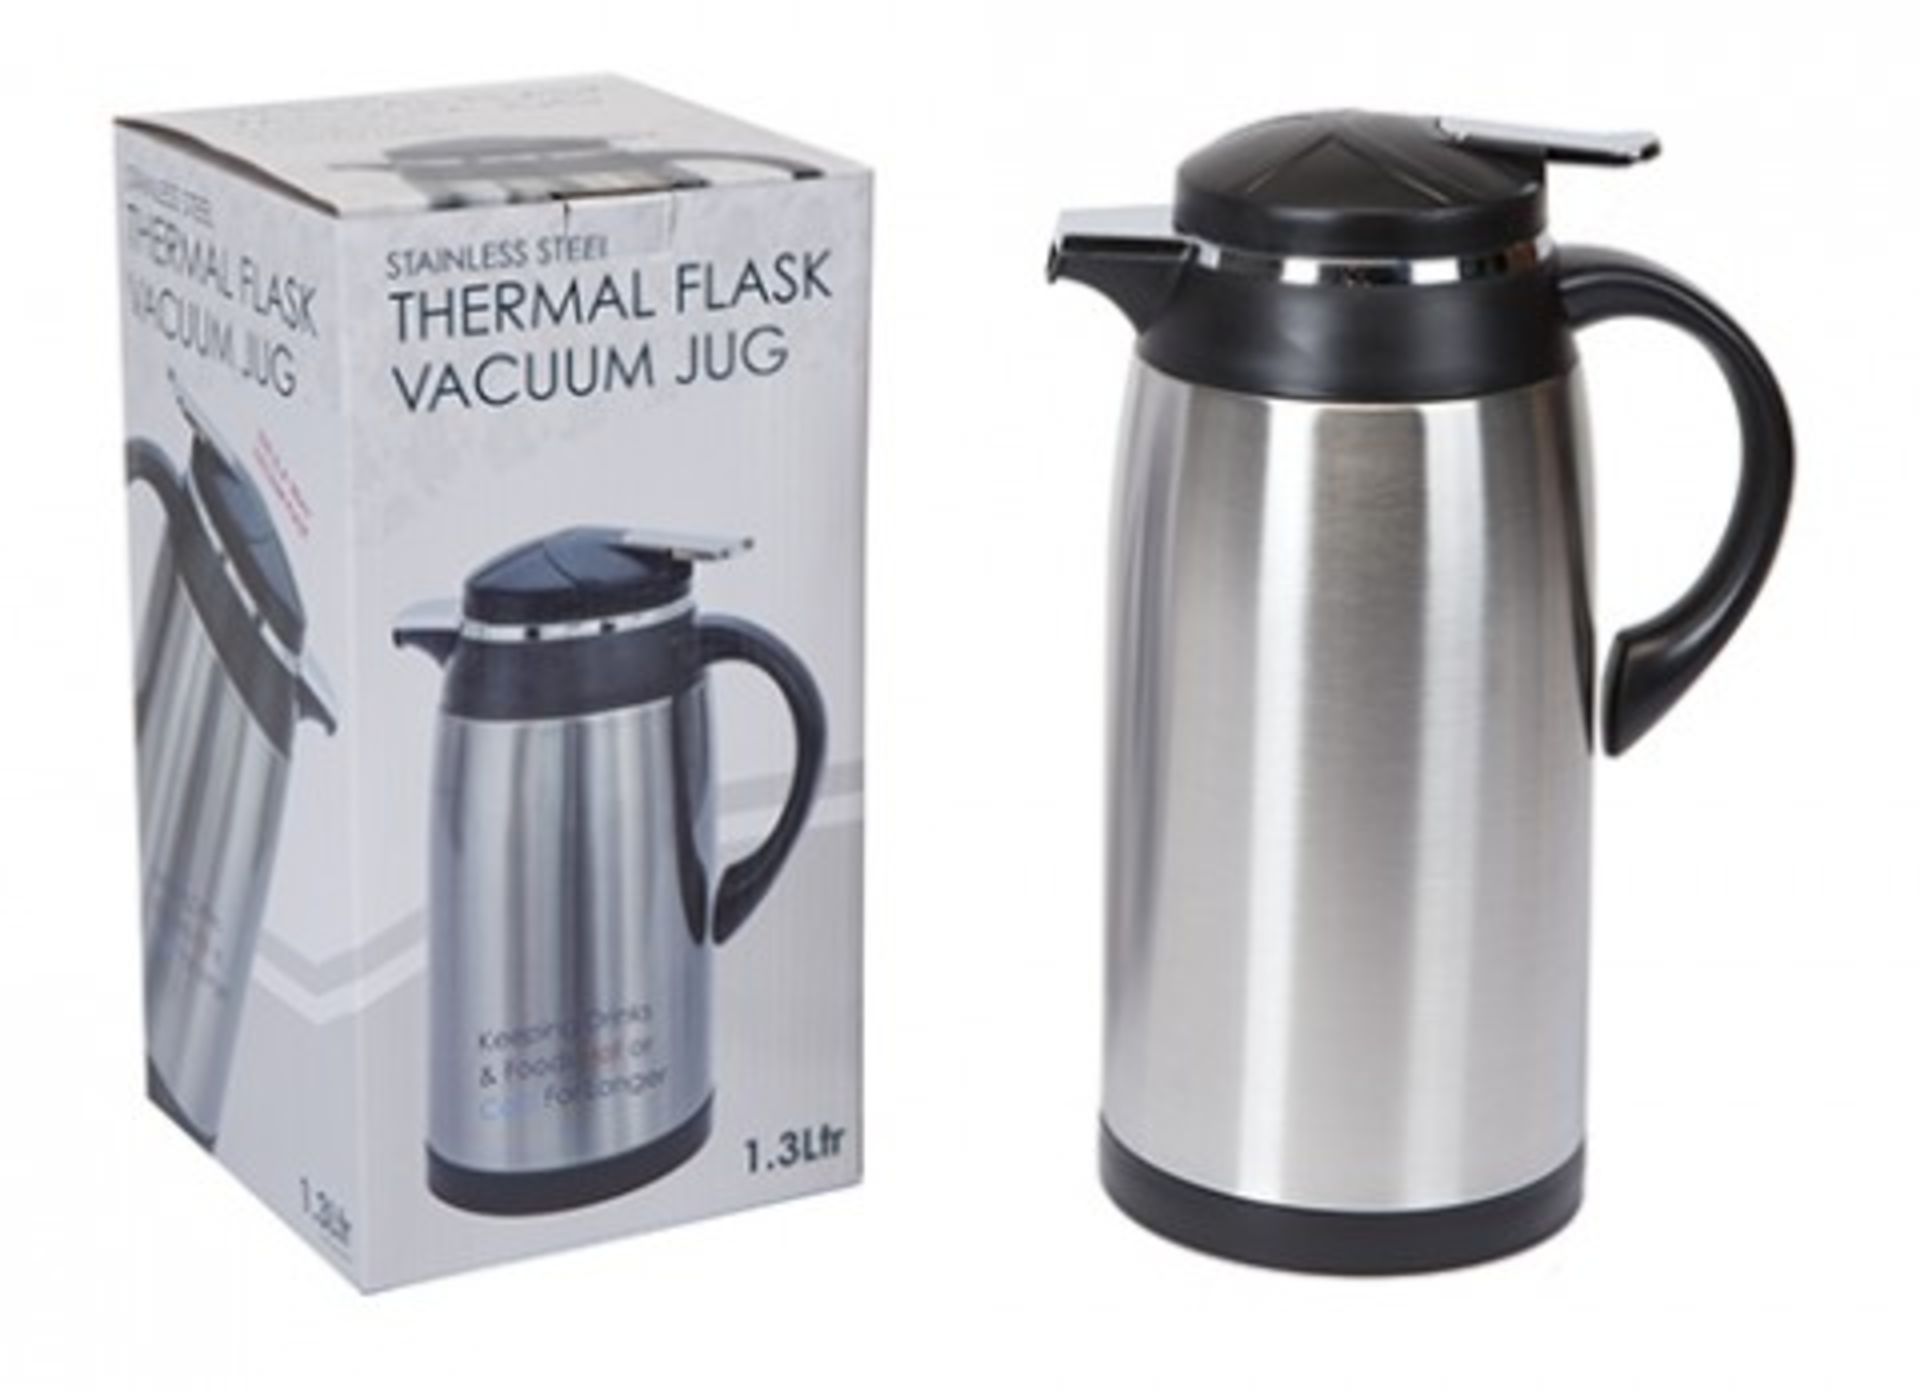 V Brand New Stainless Steel Thermal Flask Vacuum Jug X 2 YOUR BID PRICE TO BE MULTIPLIED BY TWO